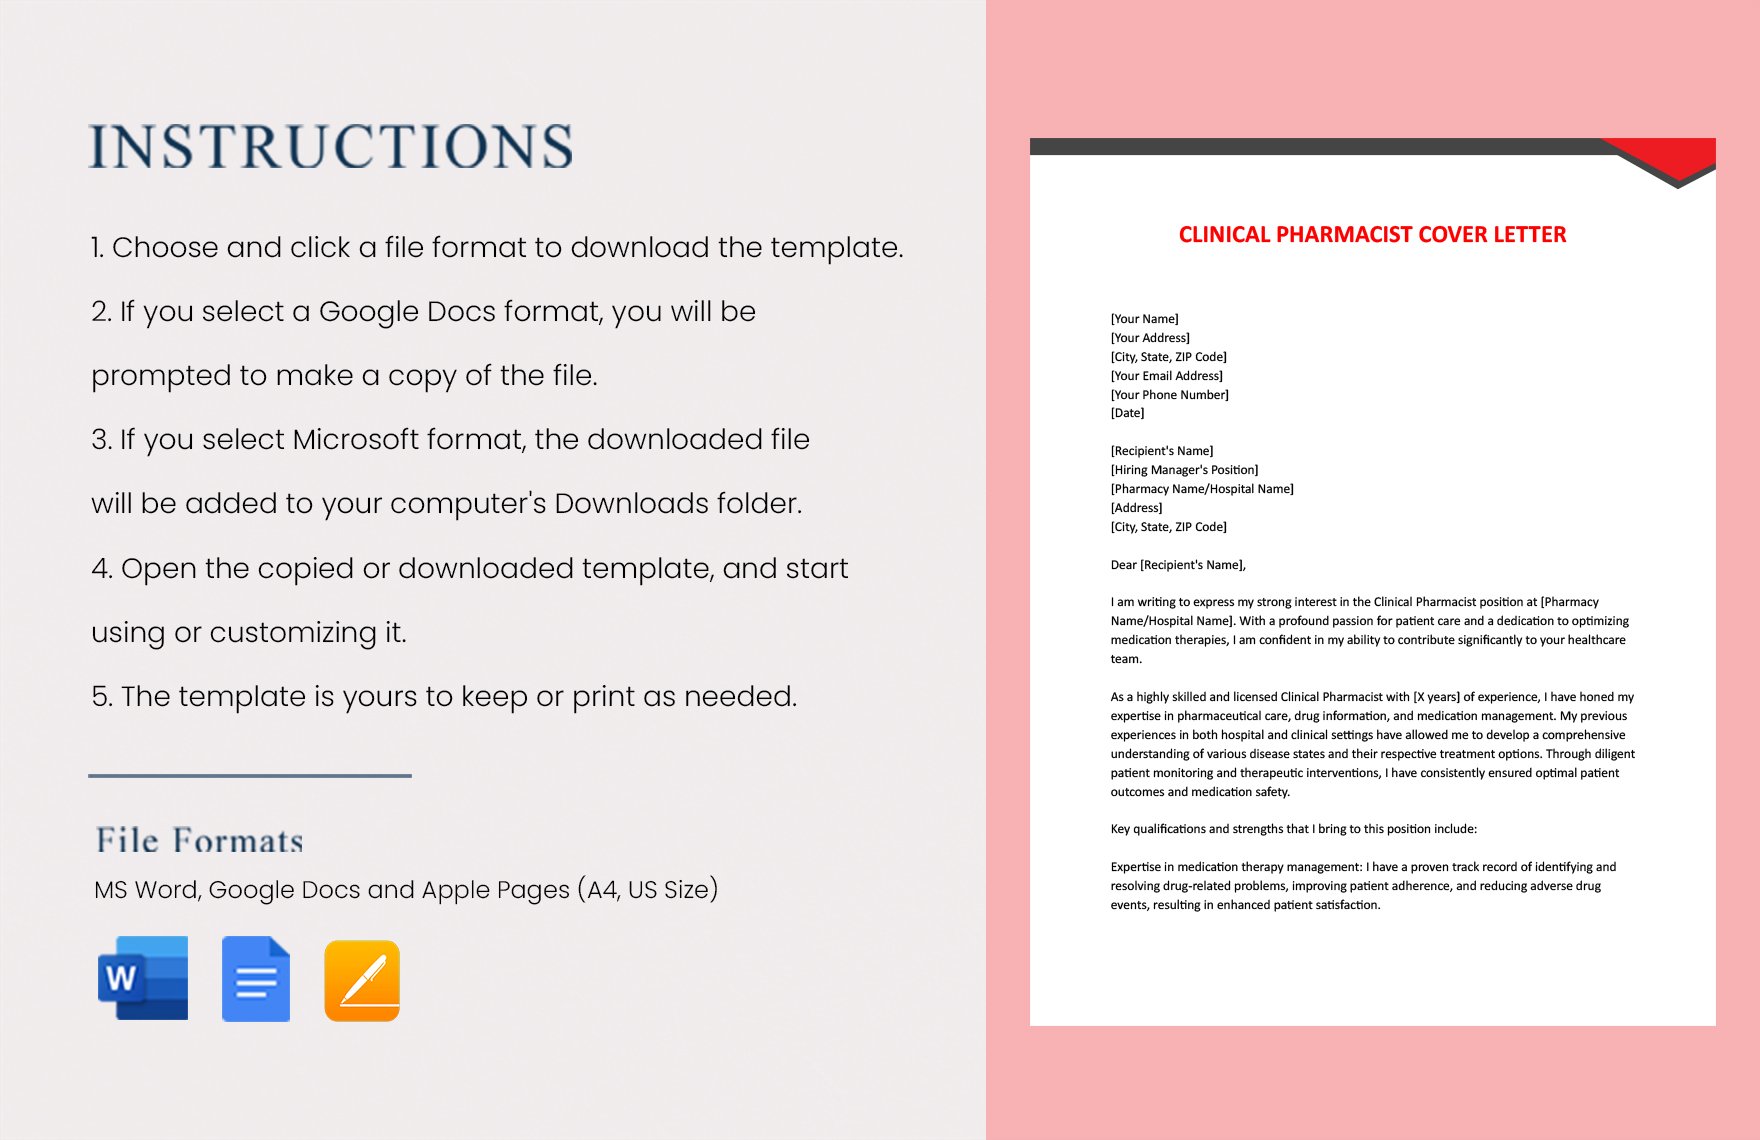 Clinical Pharmacist Cover Letter